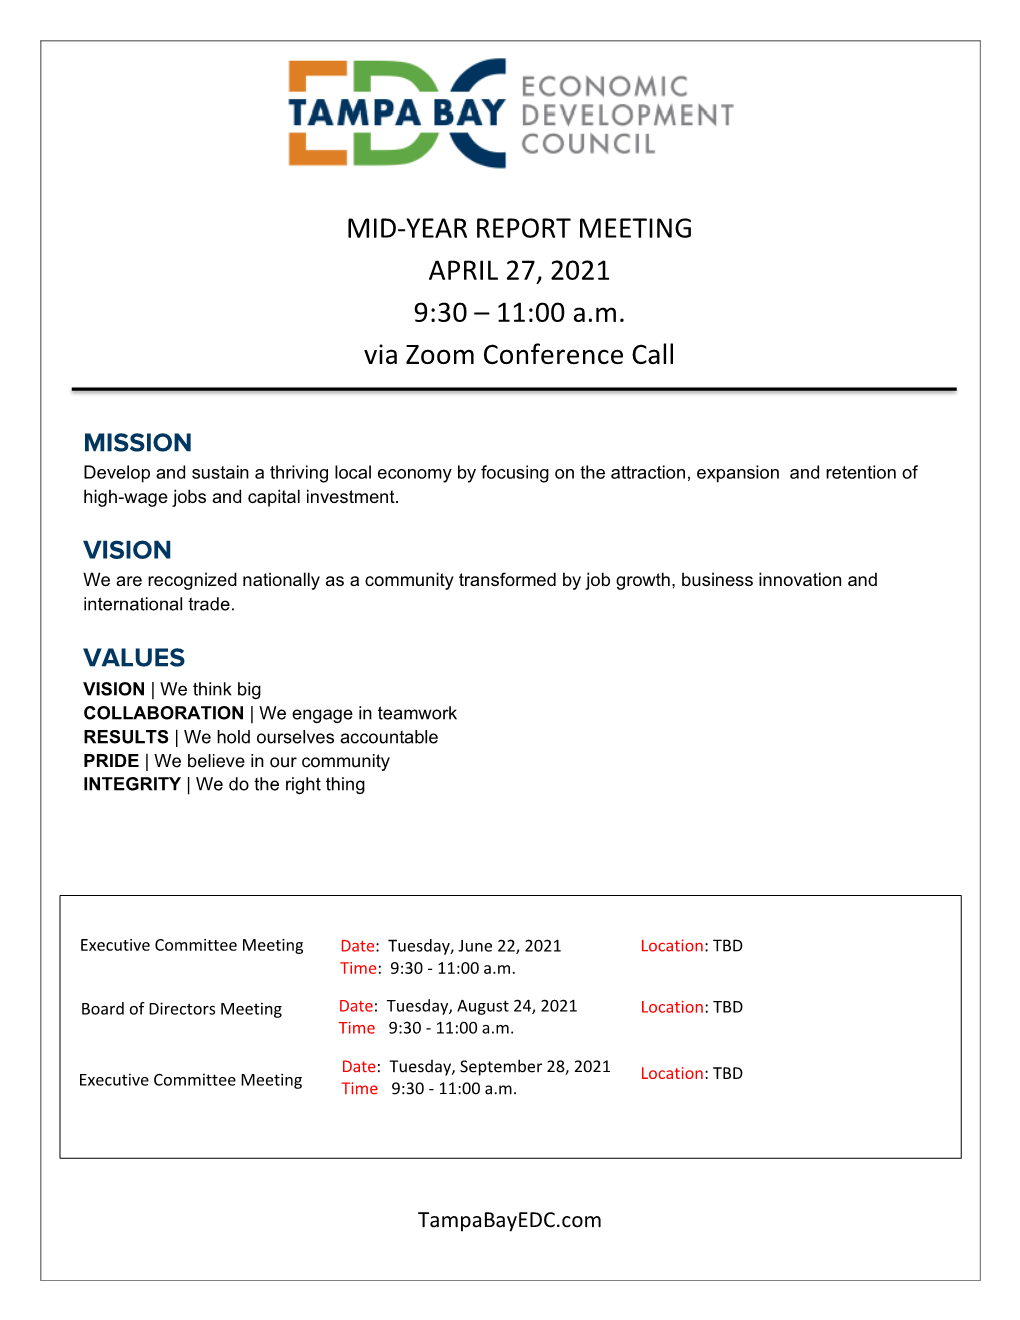 MID-YEAR REPORT MEETING APRIL 27, 2021 9:30 – 11:00 A.M